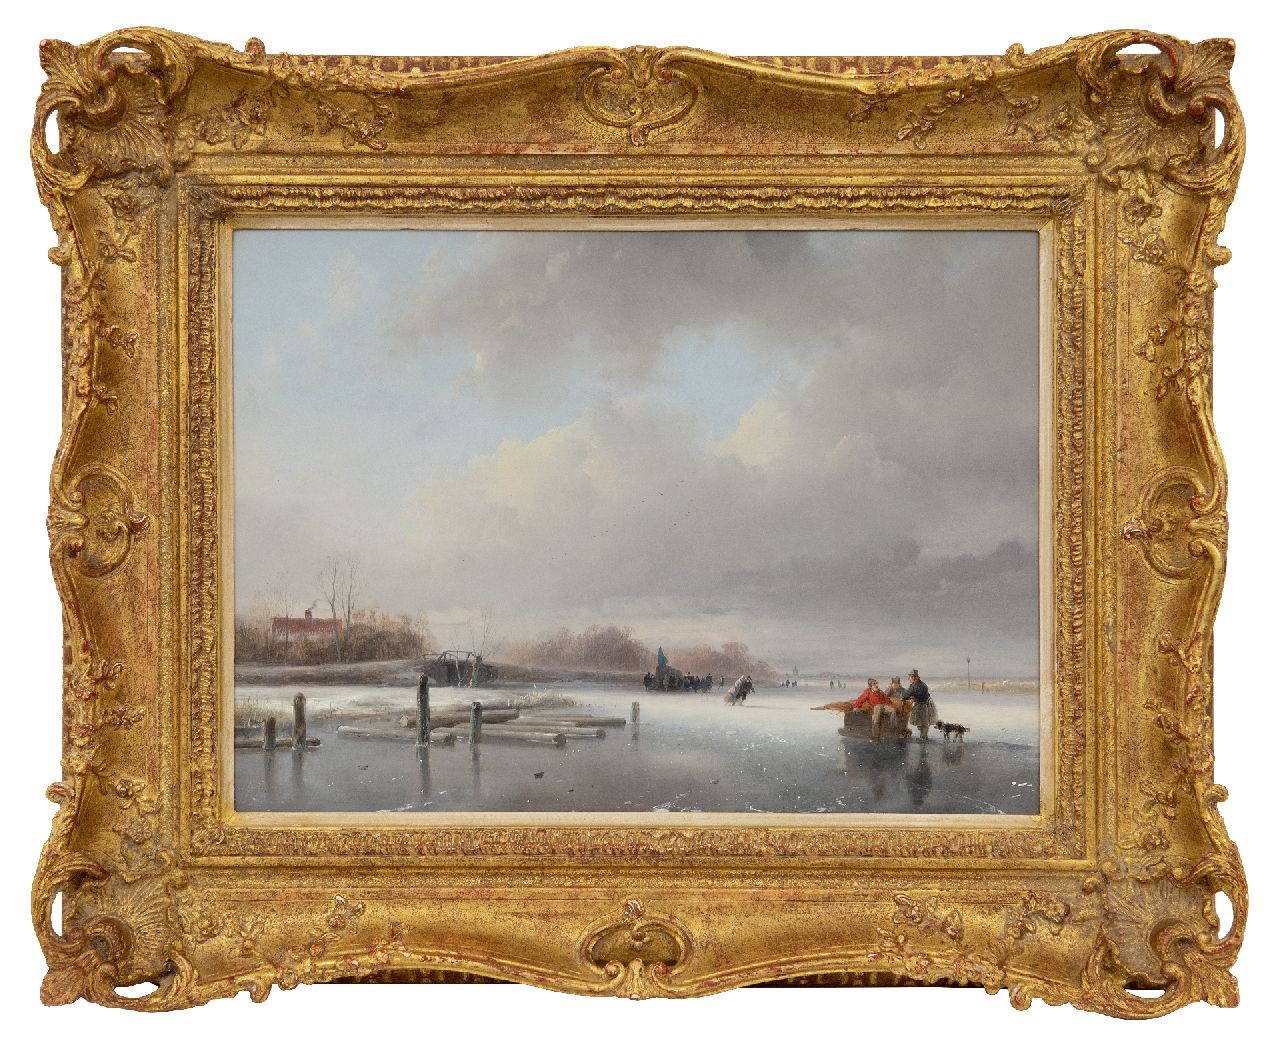 Schelfhout A.  | Andreas Schelfhout, Frozen river with skaters and a koek and zopie, oil on panel 29.5 x 39.7 cm, signed l.l. and painted ca. 1832-1834